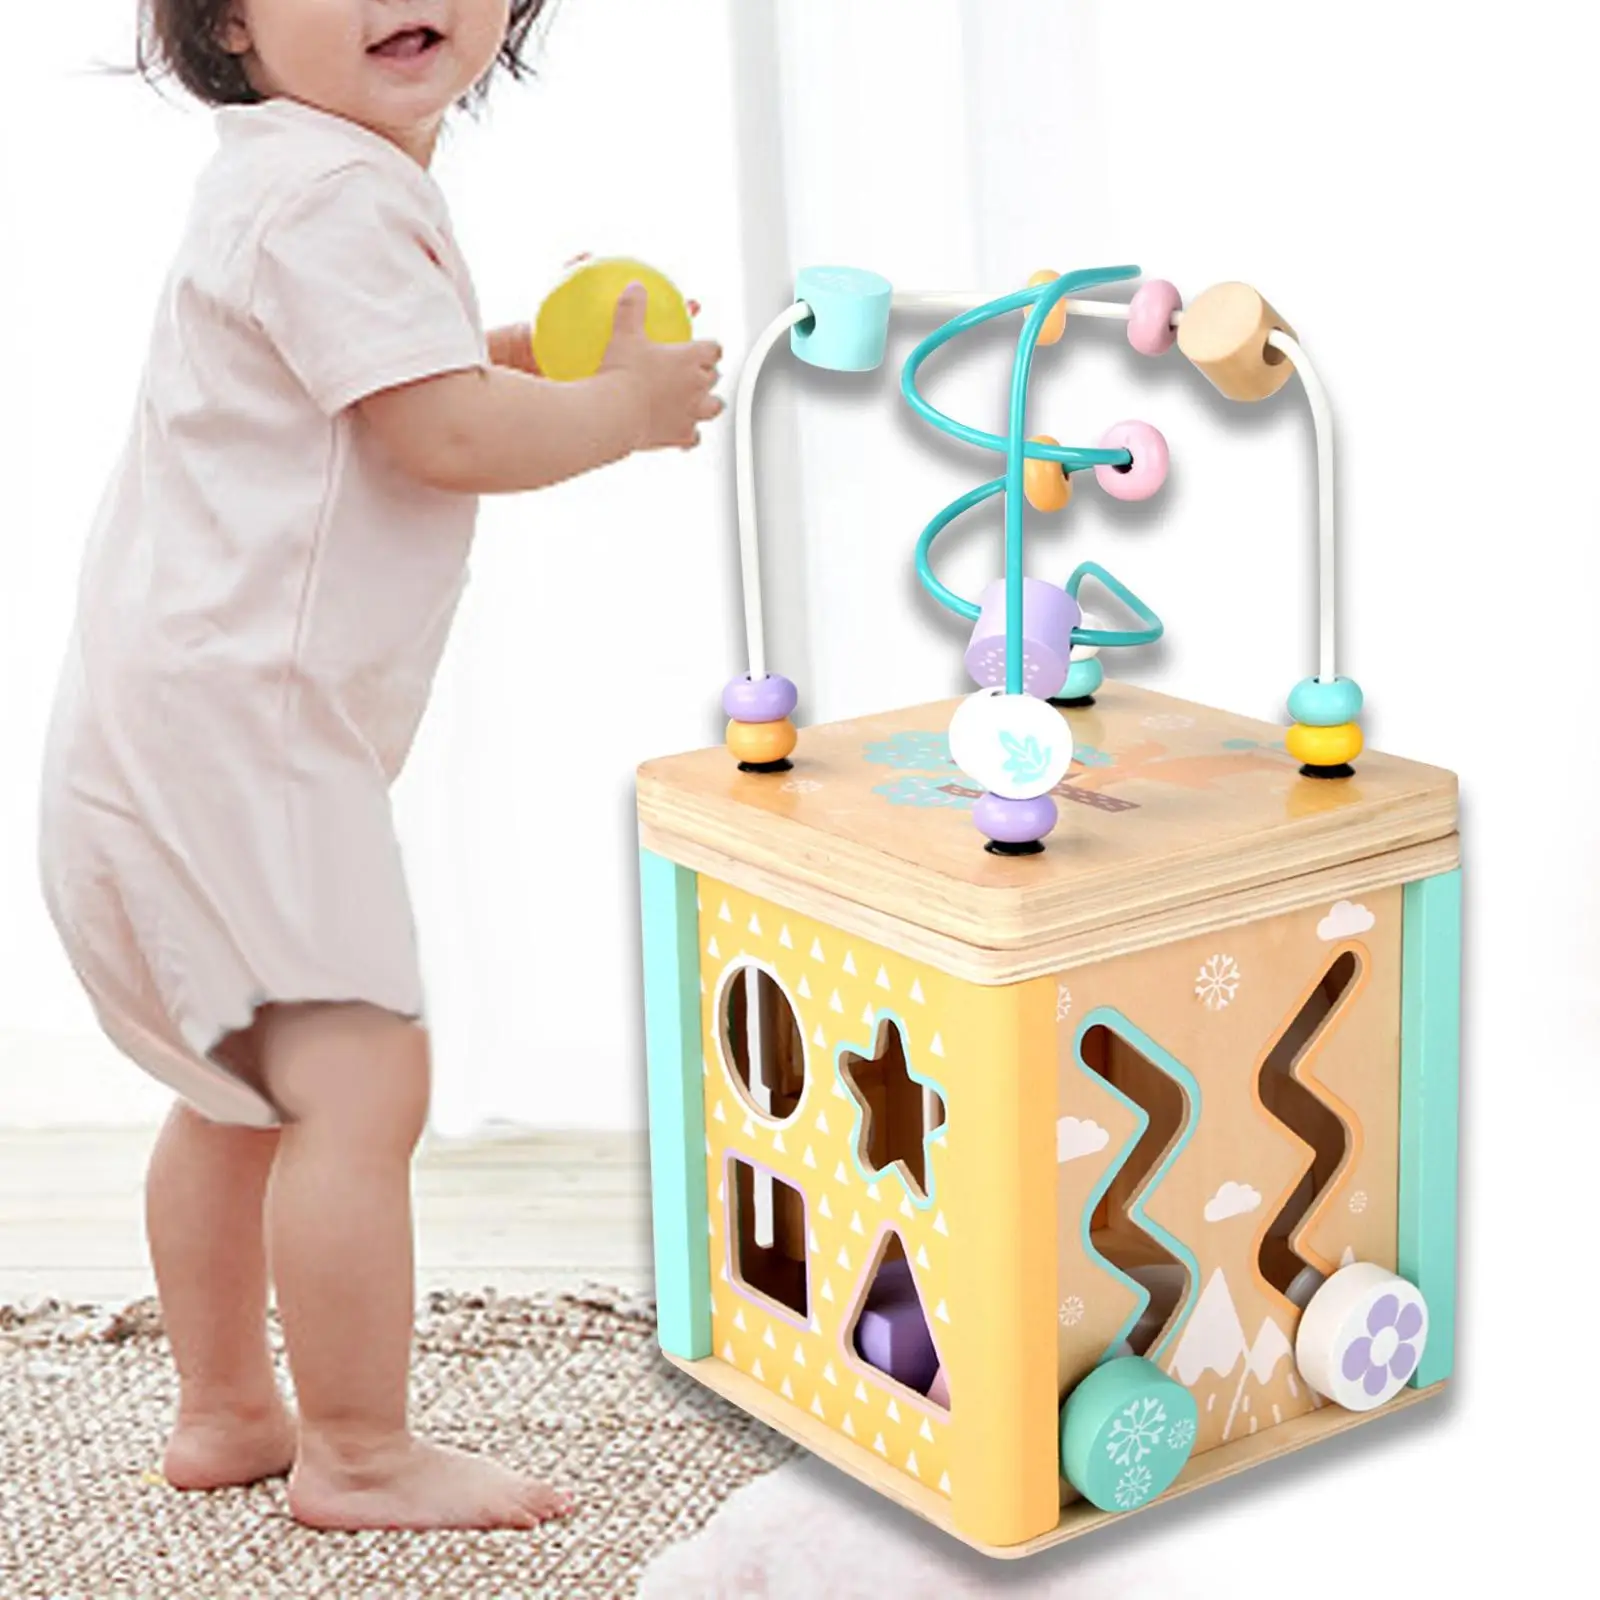 Bead Maze Toy Interactive Toy with Bead Maze for Preschool Christmas